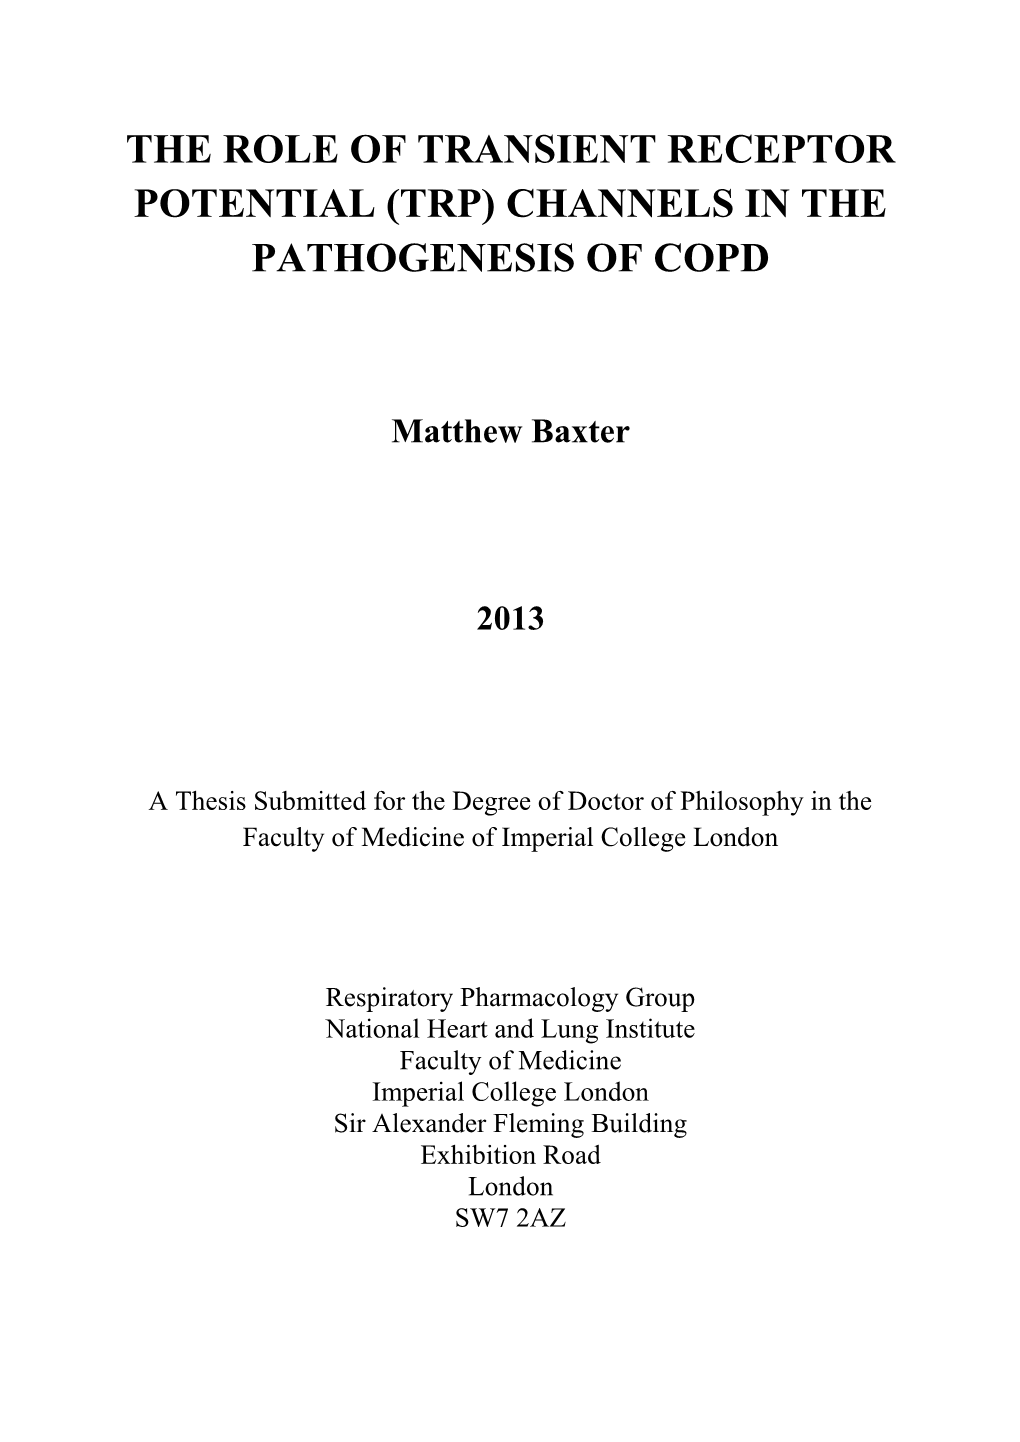 The Role of Transient Receptor Potential (Trp) Channels in the Pathogenesis of Copd